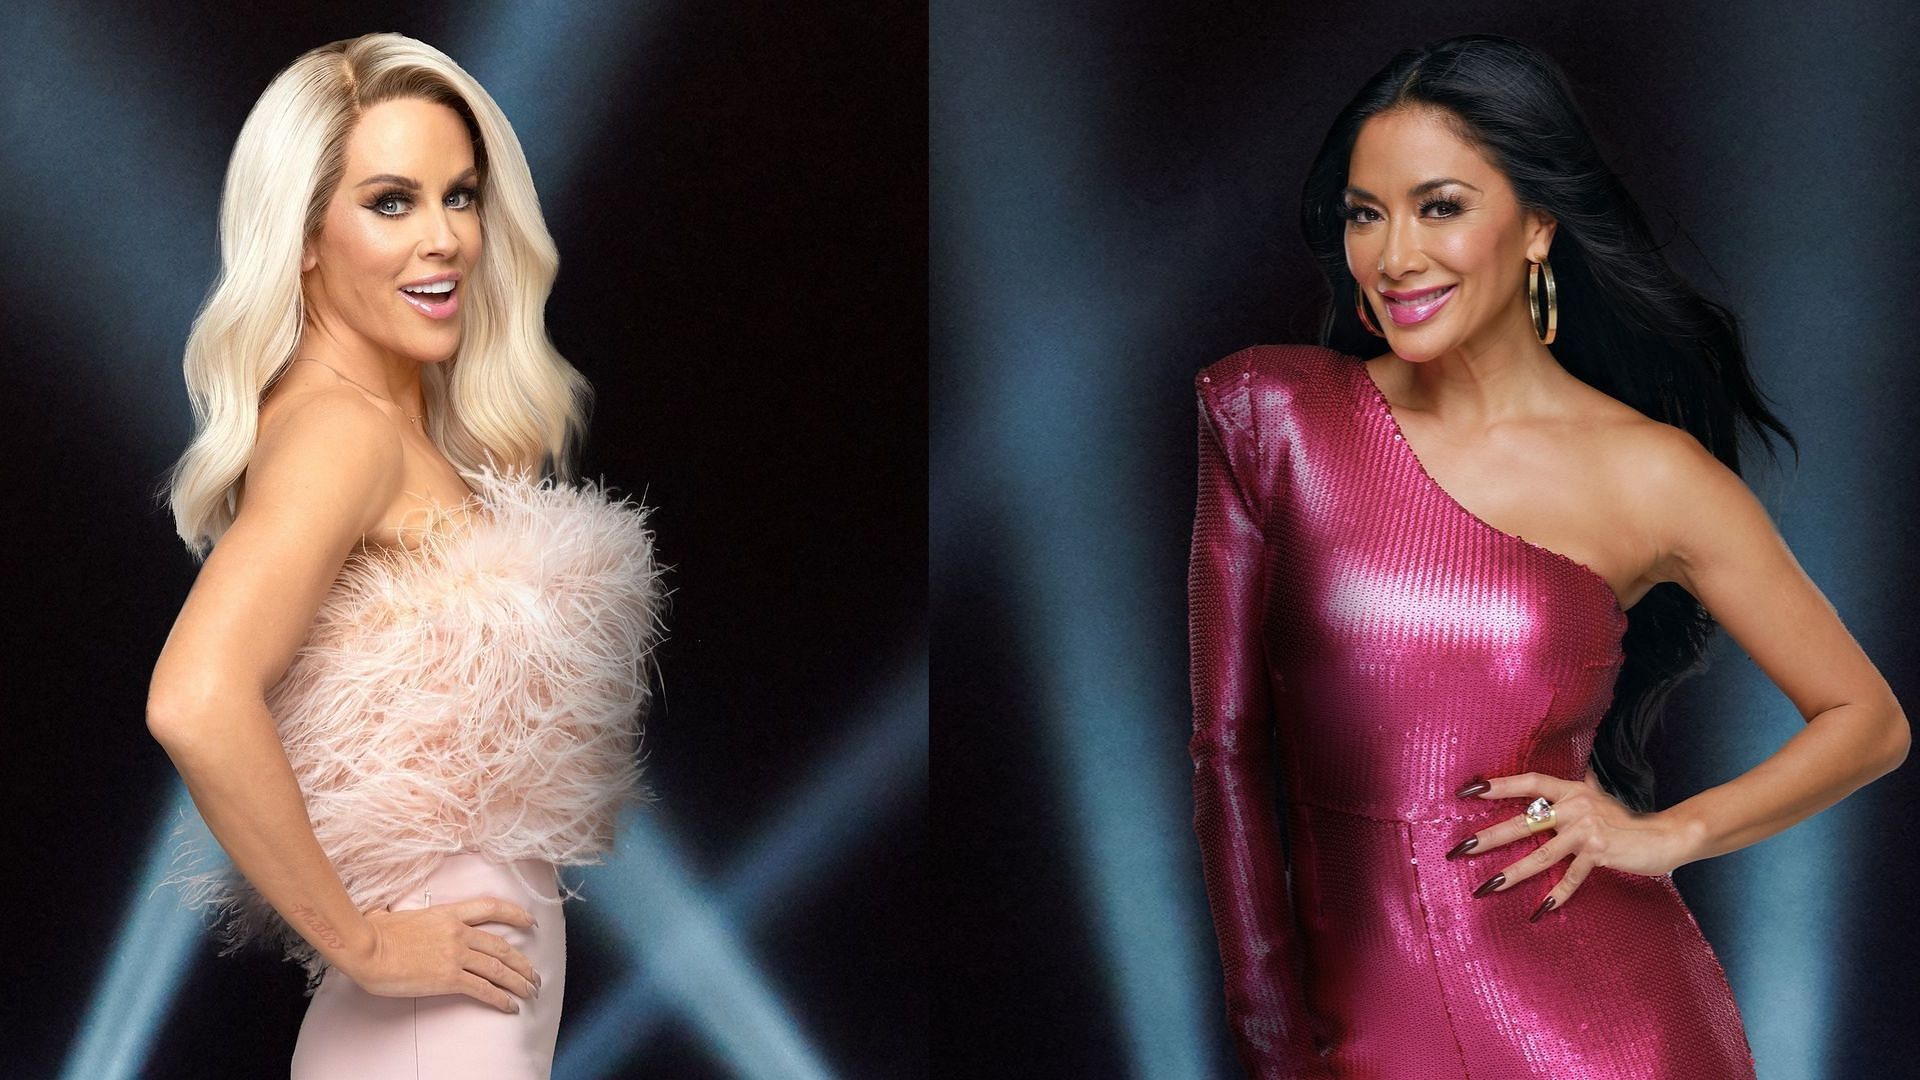 Jenny McCarthy and Nicole Scherzinger set to appear on The Masked Singer as judges